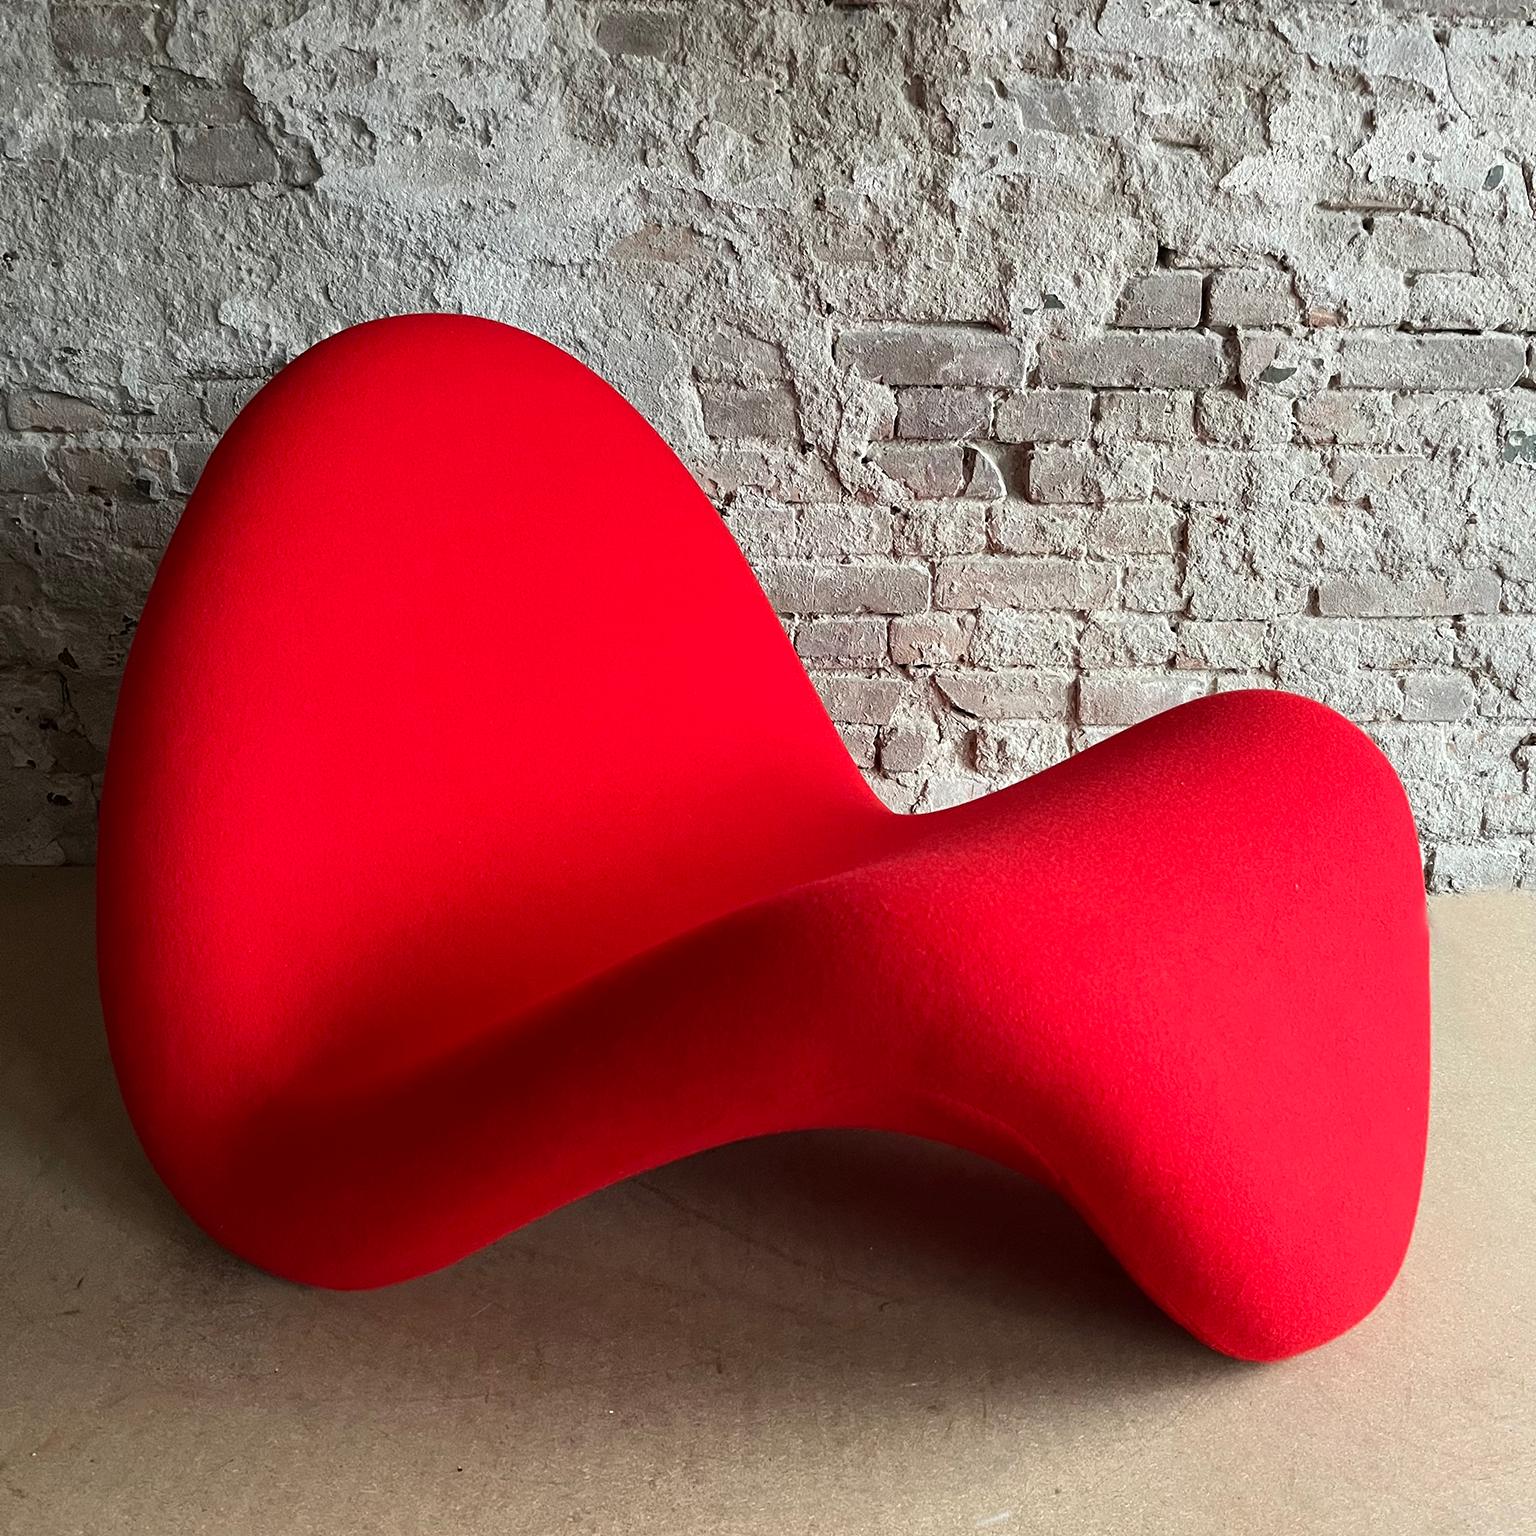 Iconic Lounge Chair by Pierre Paulin. The soft, streamlined form, shapely lines of this sculptural and comfortable Tongue chair, was designed in the 60s and produced by Artifort.

This piece is professionally reupholstered in red tonus including new